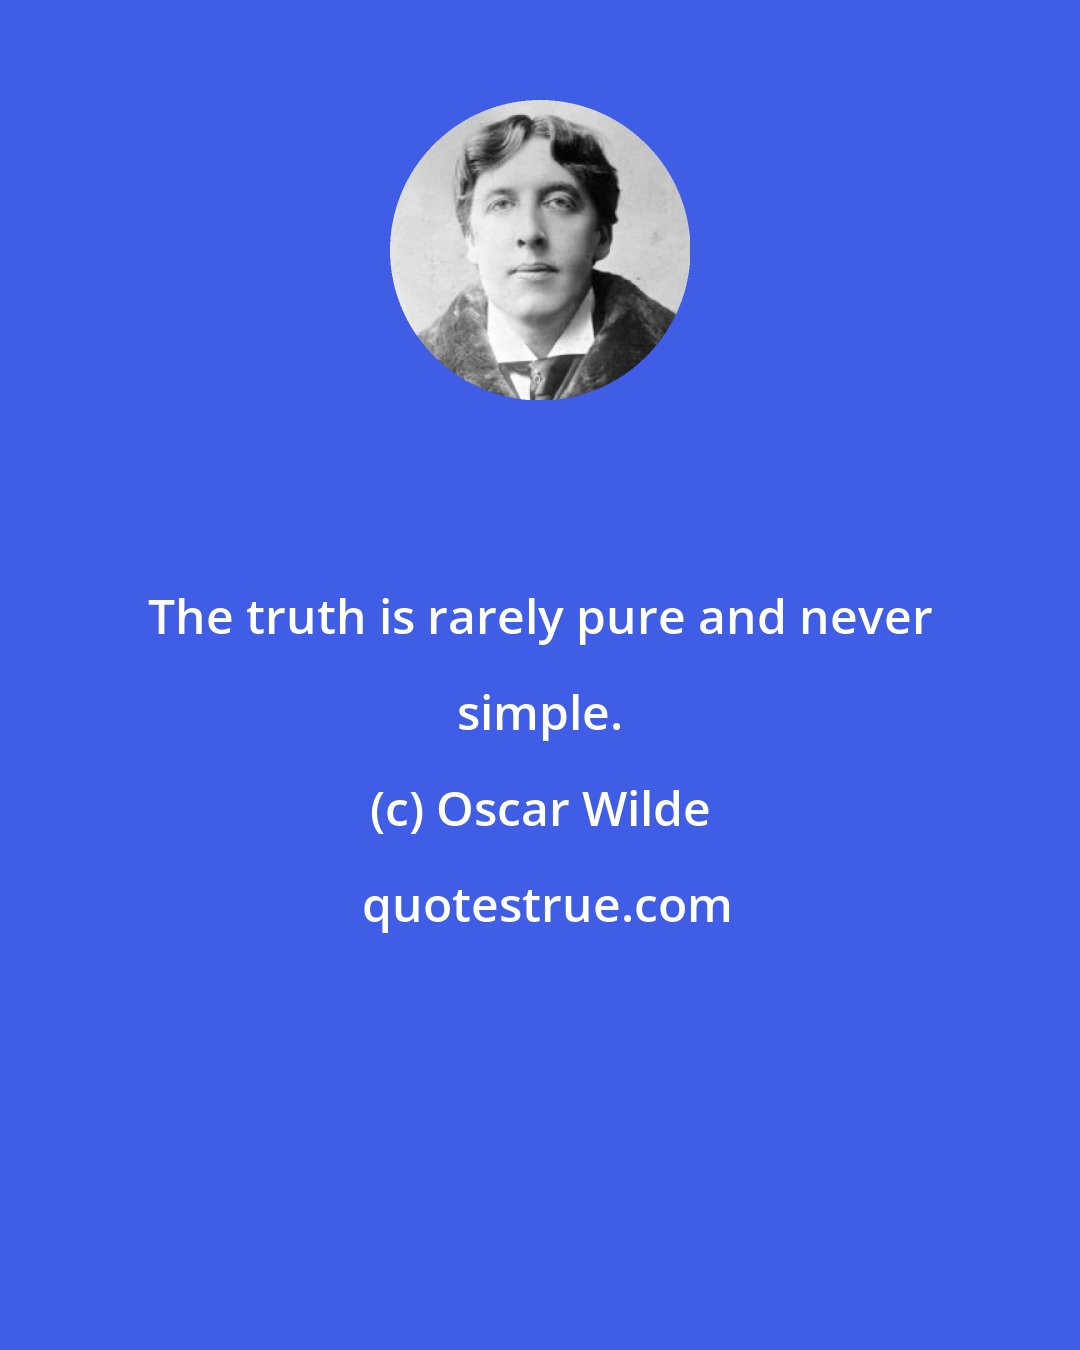 Oscar Wilde: The truth is rarely pure and never simple.